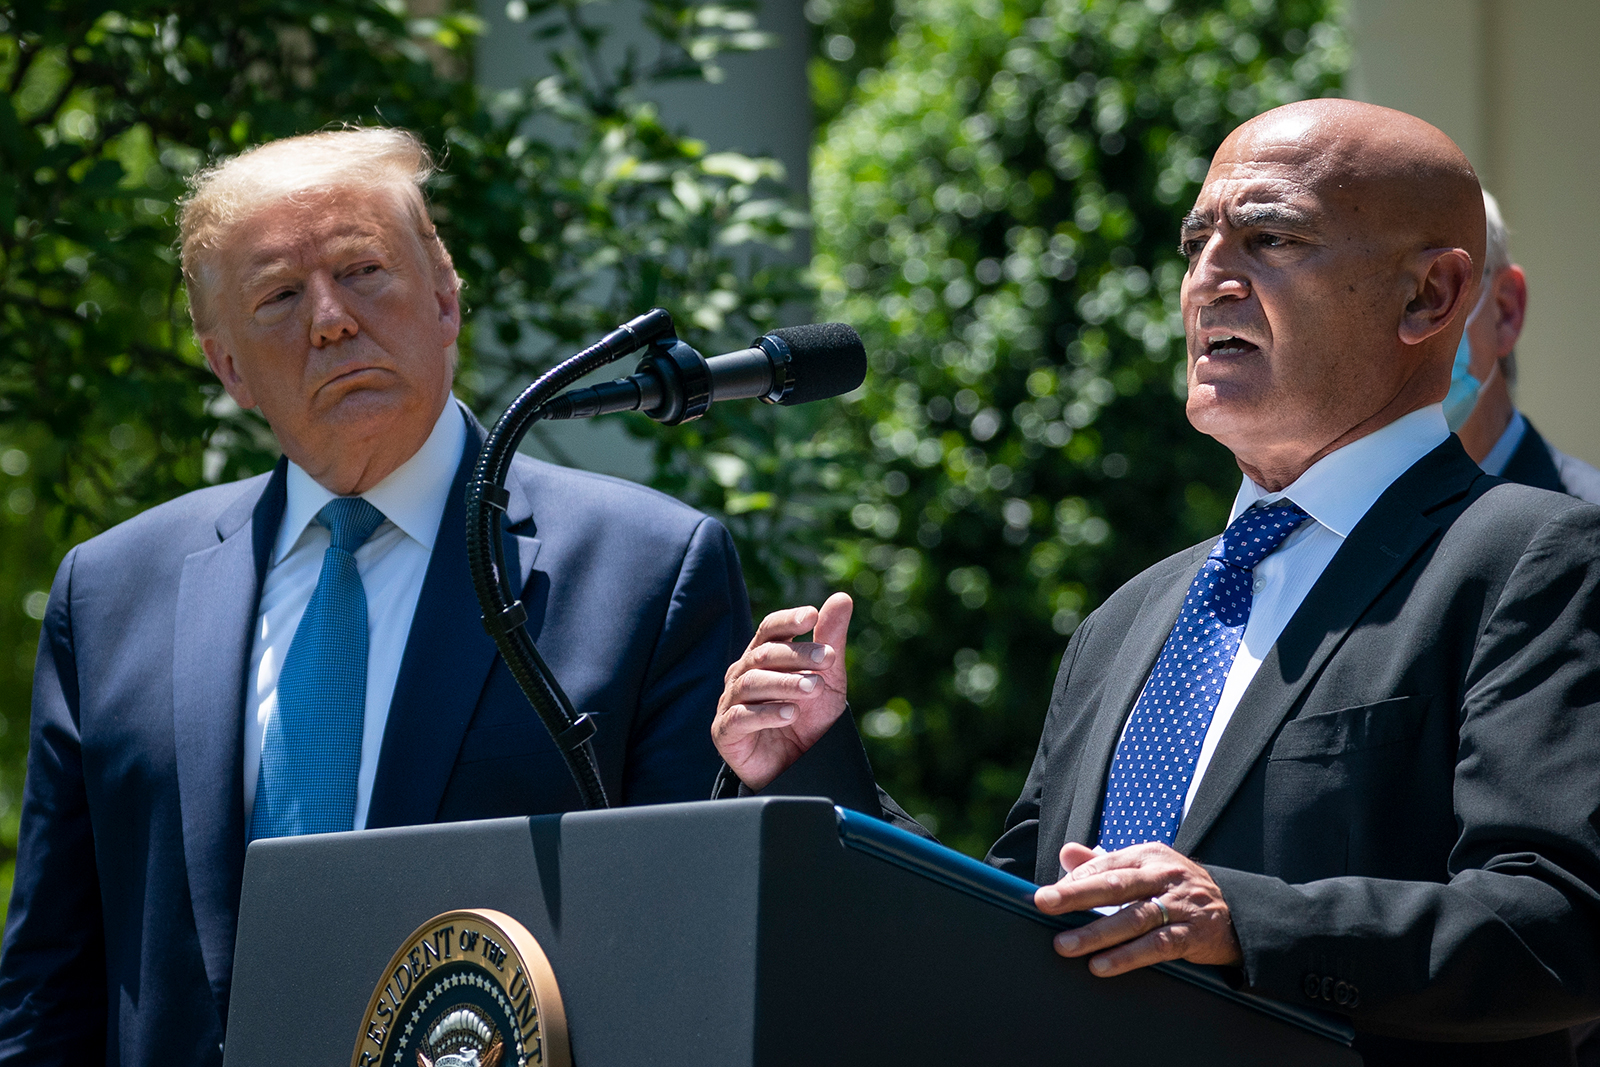 President Donald Trump listens as Moncef Slaoui, the head of the US government's effort to develop a vaccine against Covid-19, speaks about coronavirus vaccine development in the Rose Garden of the White House, in Washington, DC on May 15.